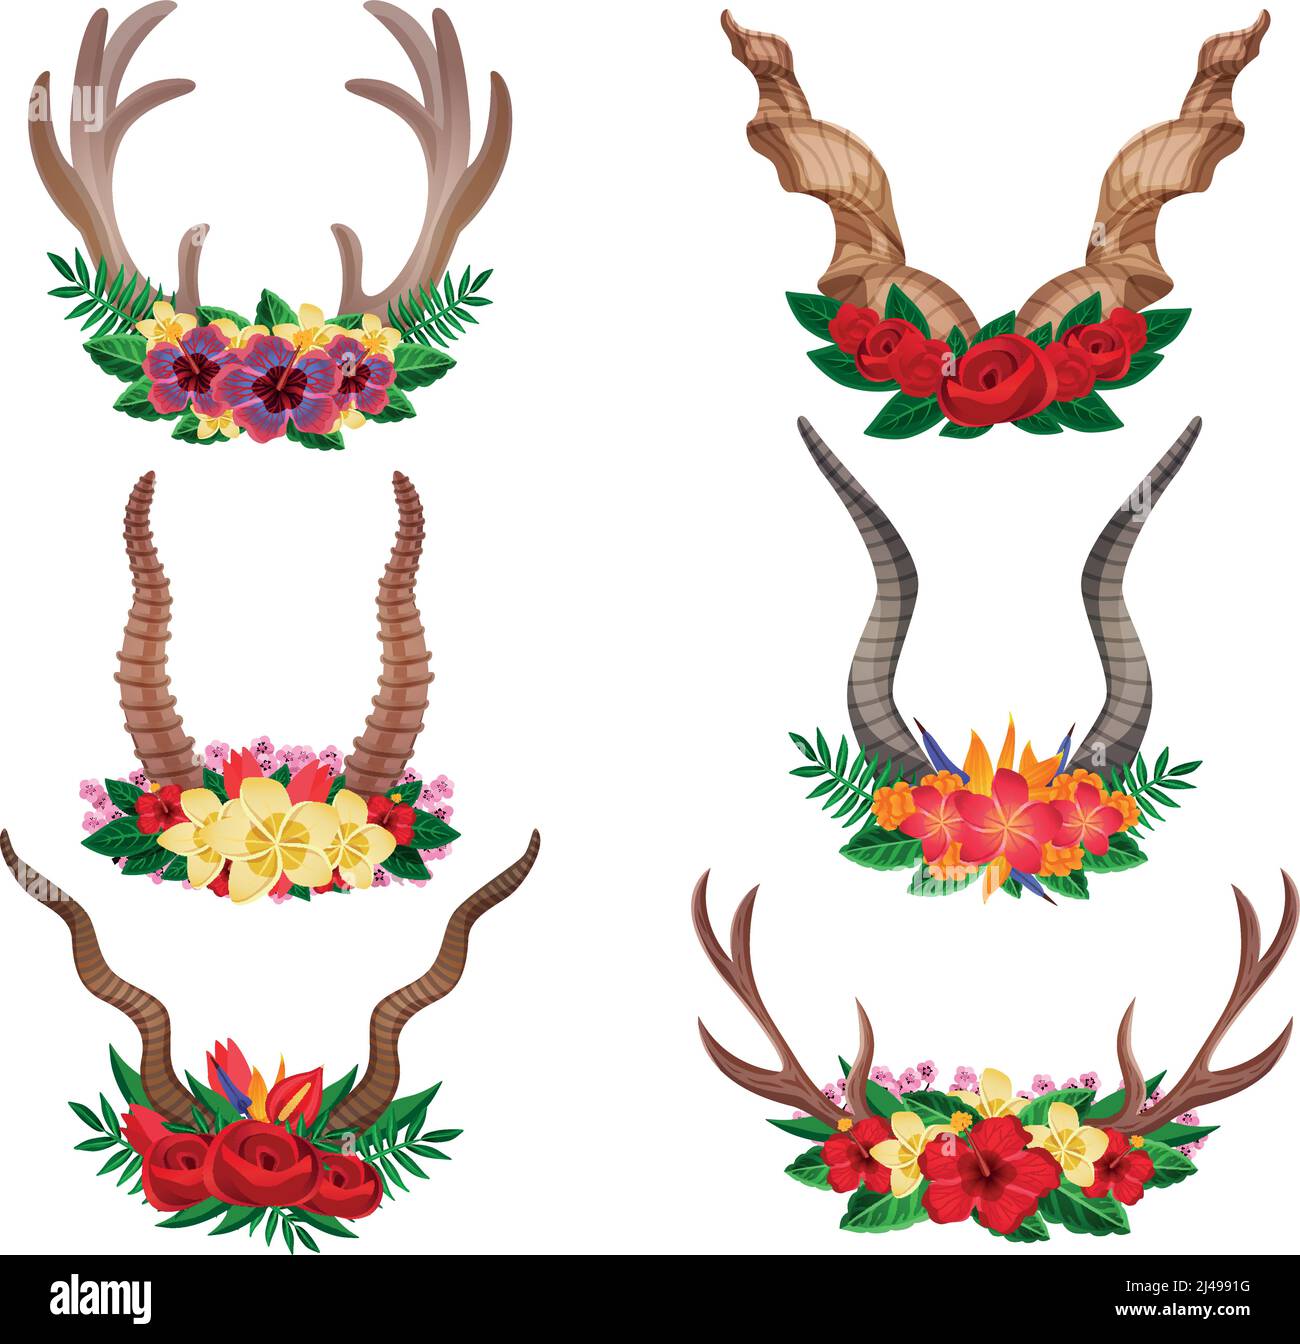 Wild animals dear mountain goat moose ornamental floral horns set decorated with flower arrangements isolated vector illustration Stock Vector